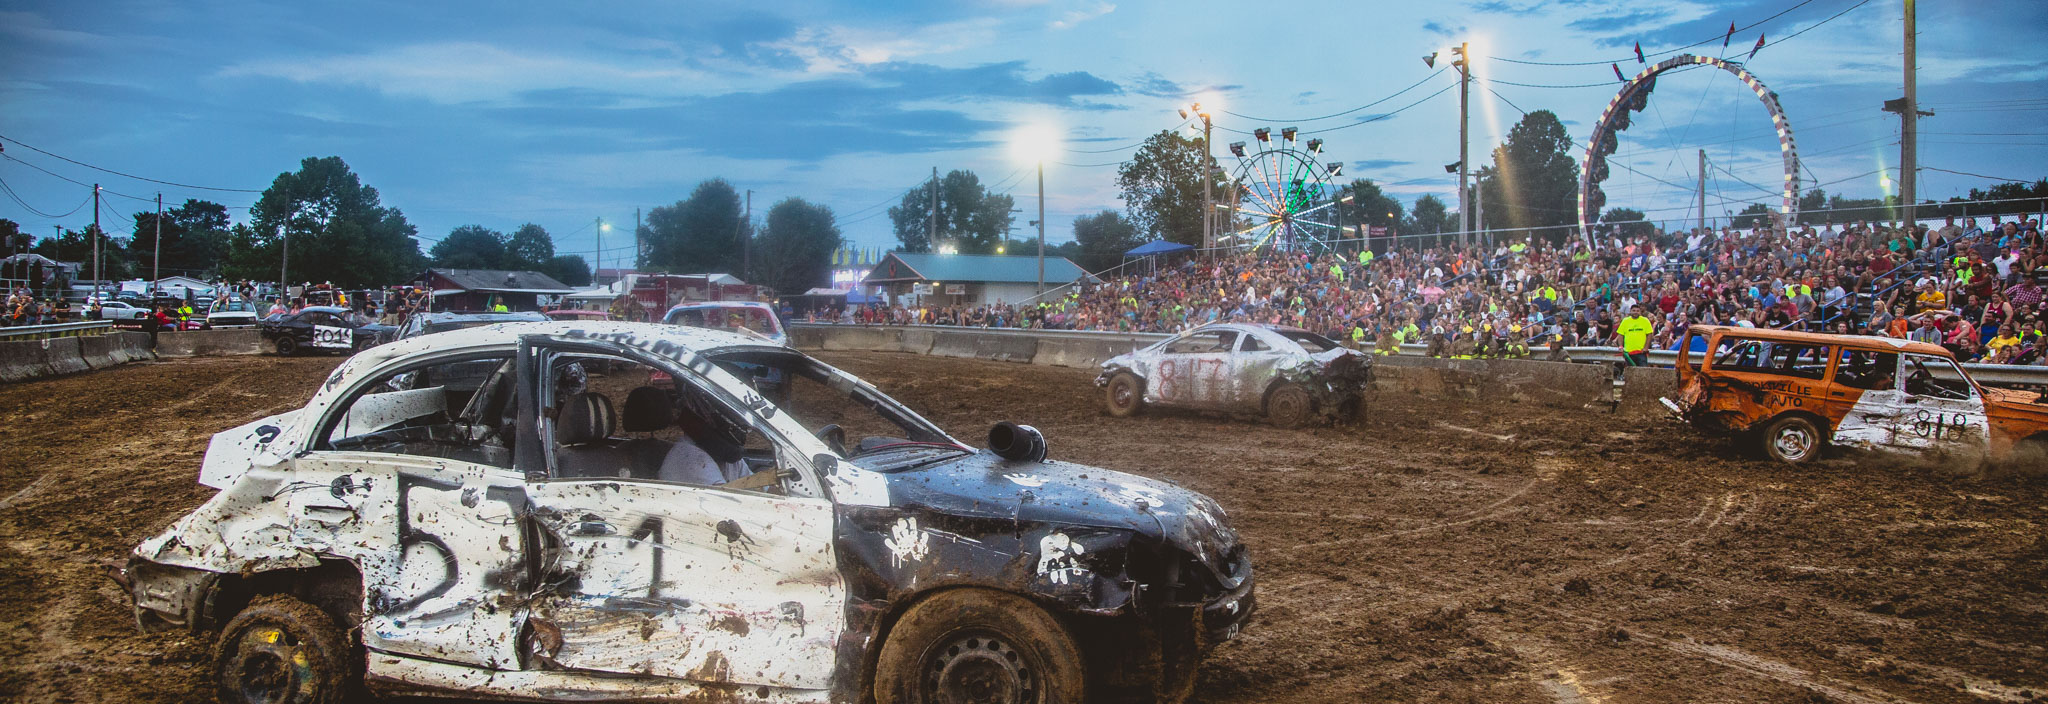 69th Perry County Ohio Fair | July 18 - 23, 2022 